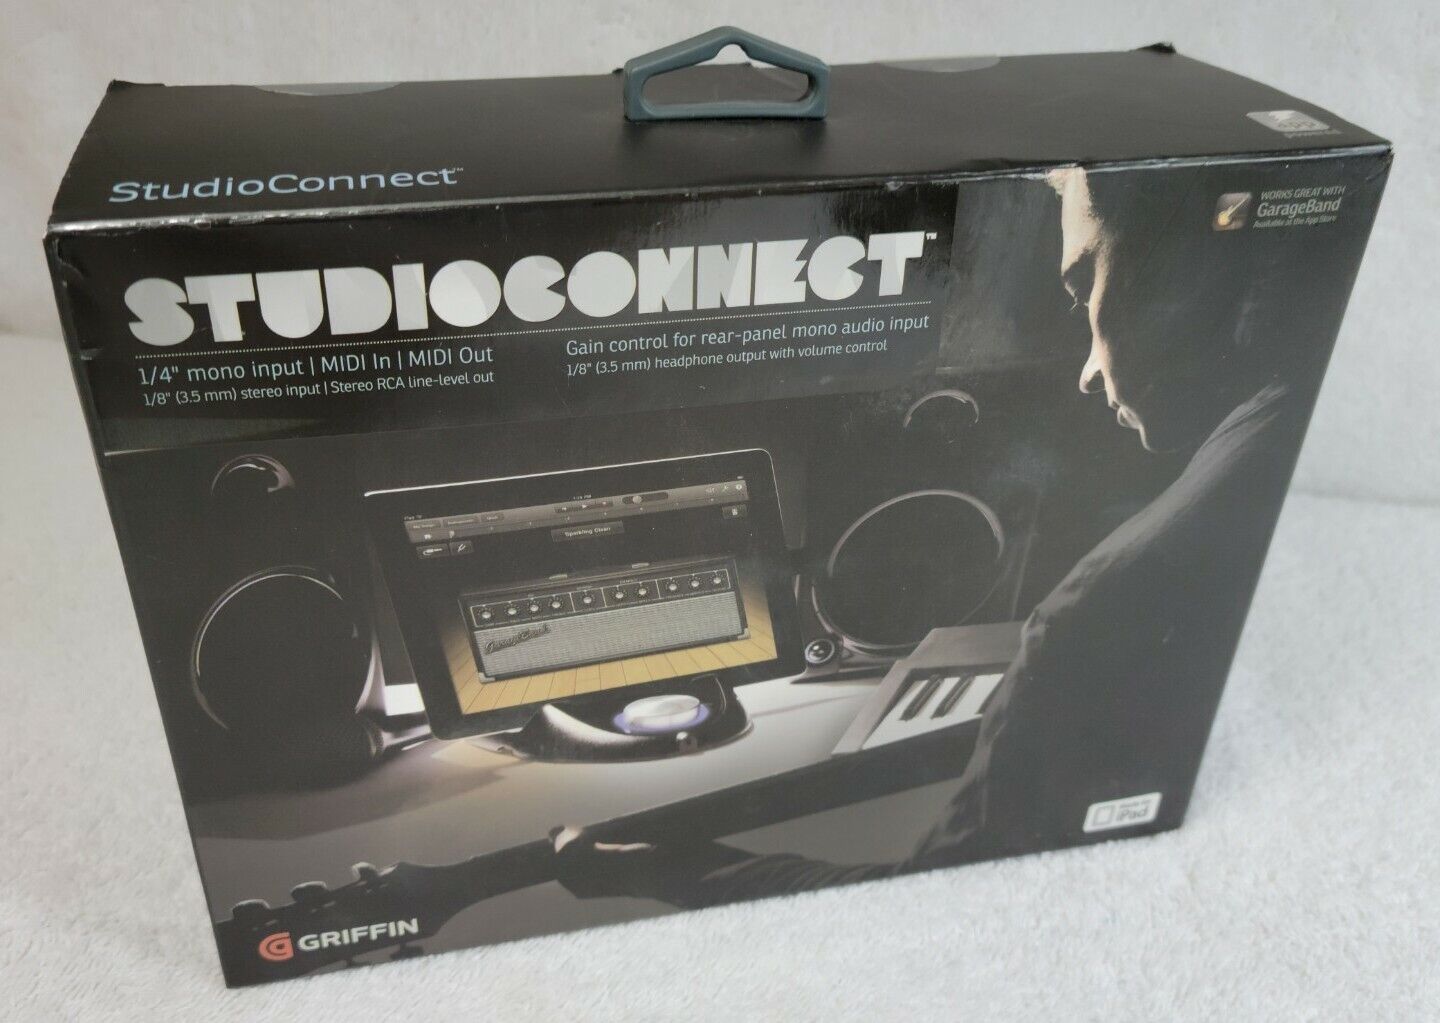 Griffin GC35855 Studio Connect MIDI Controller & Charging Dock for iPad NEW 